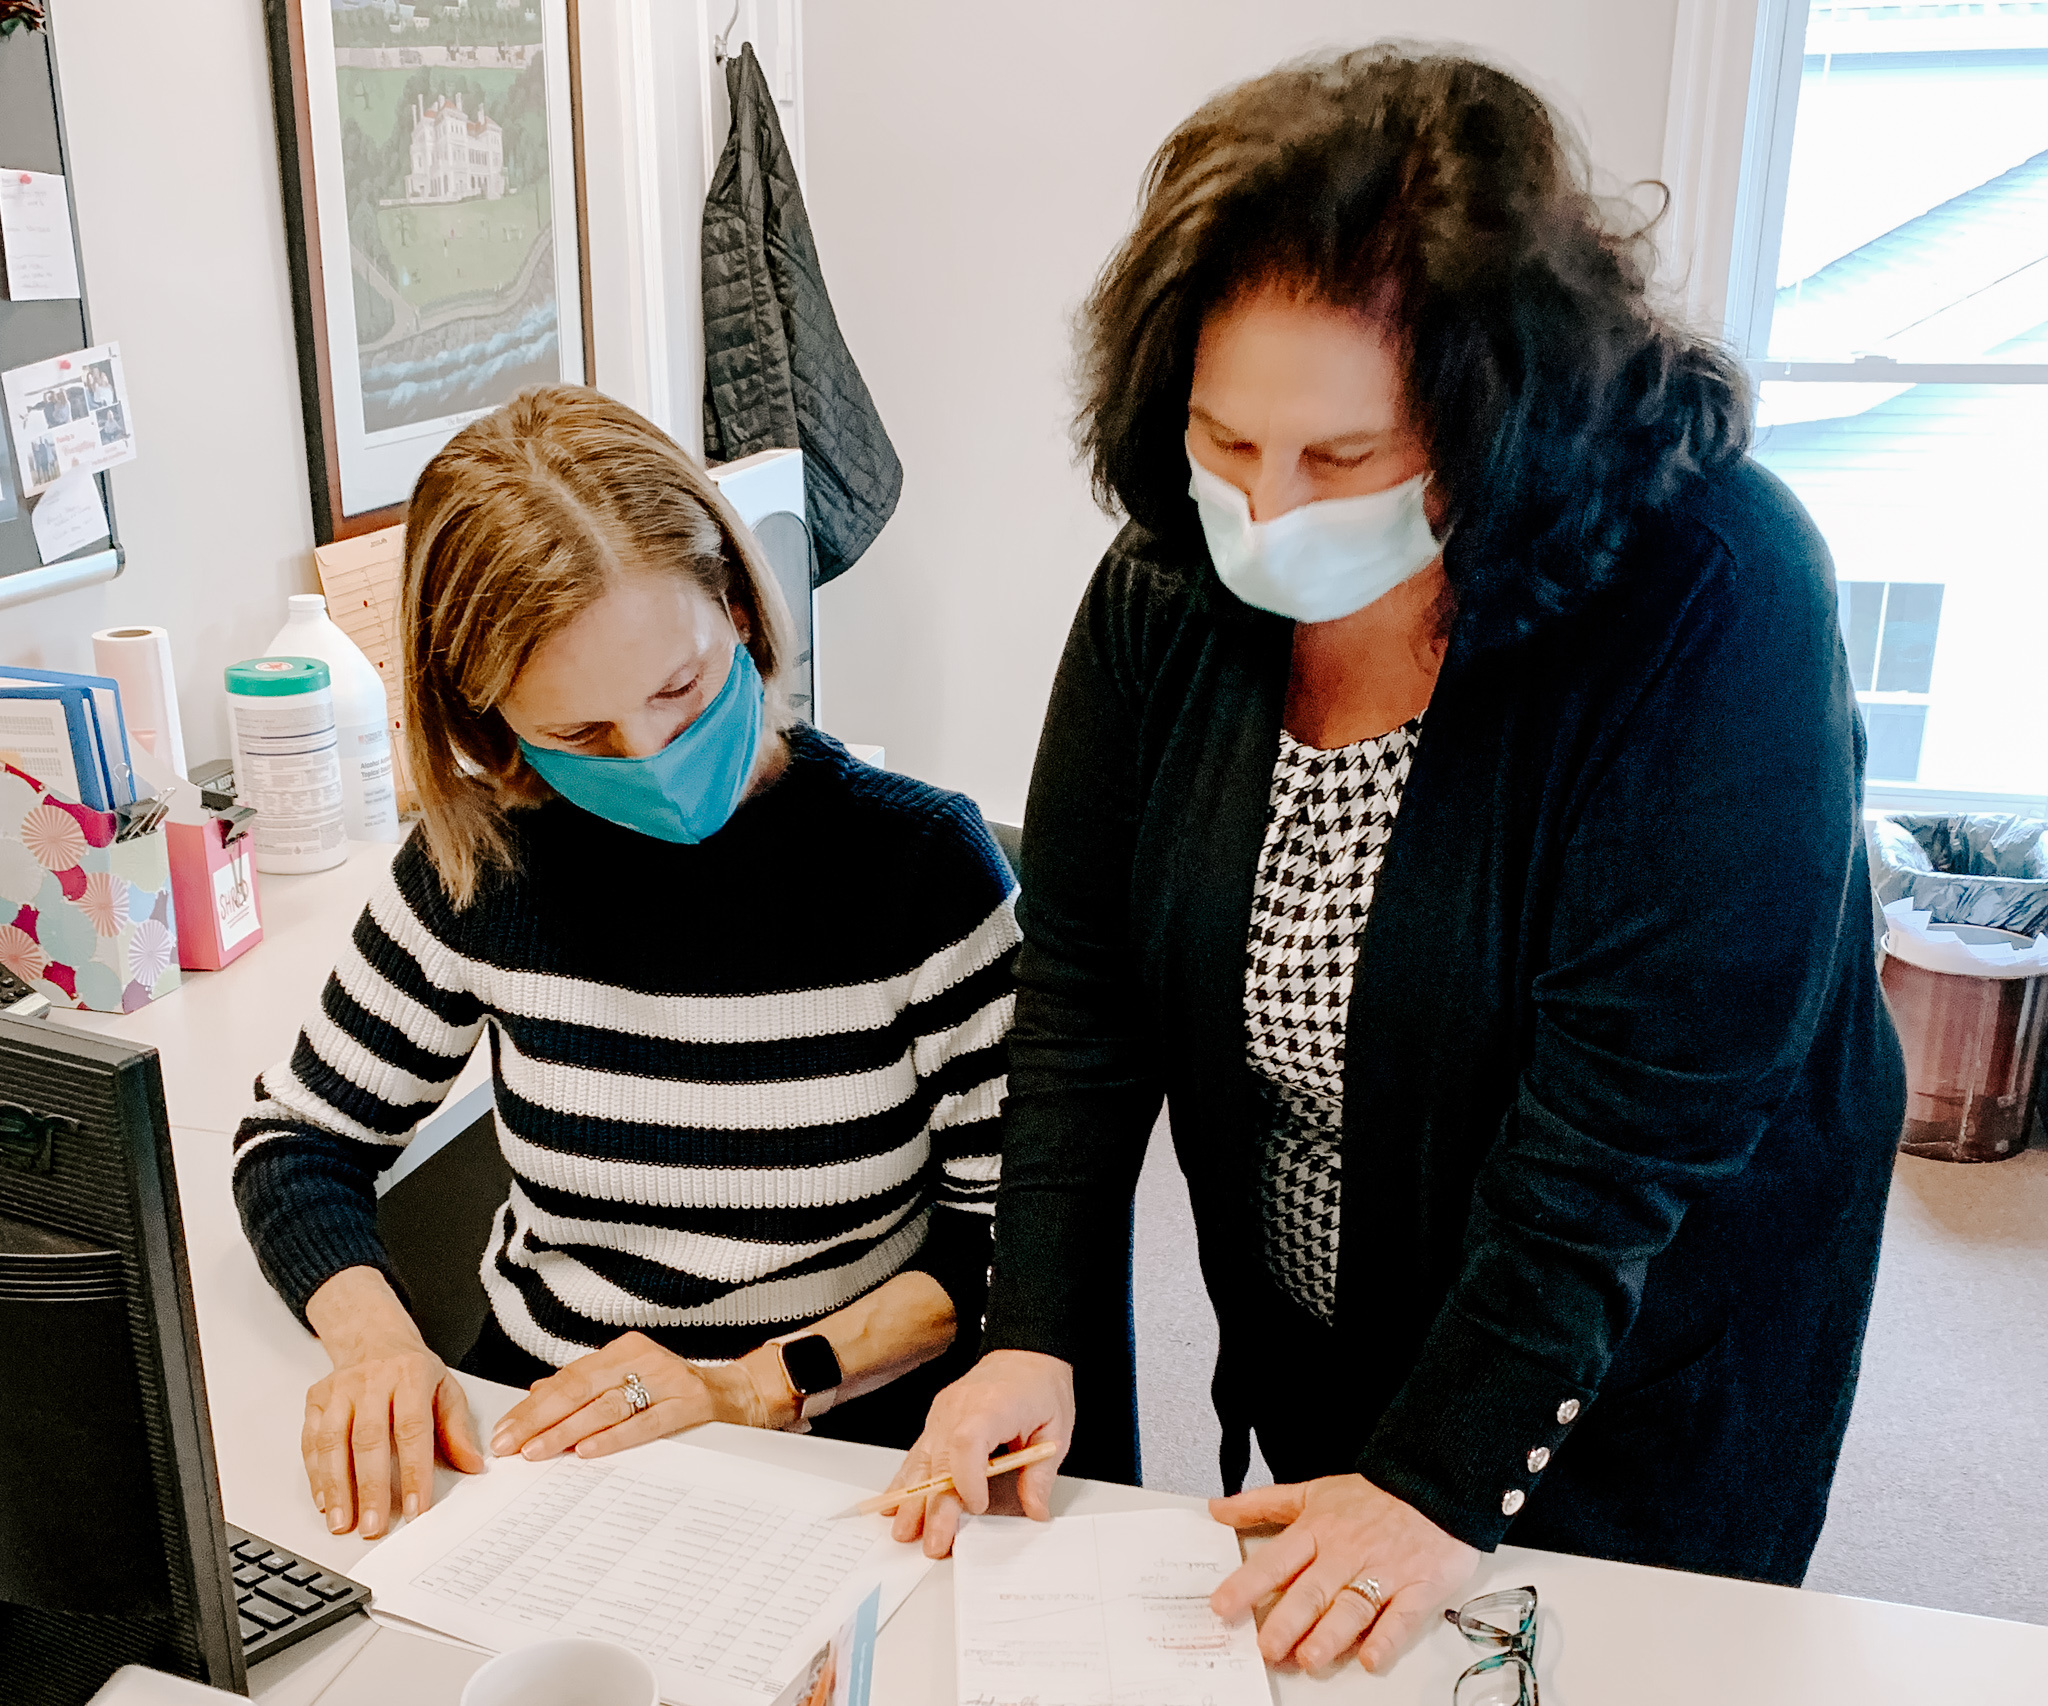 Volunteer Elayne Casey, left, with Administrative Assistant Ann Seaback in HopeHealth's Wakefield office.